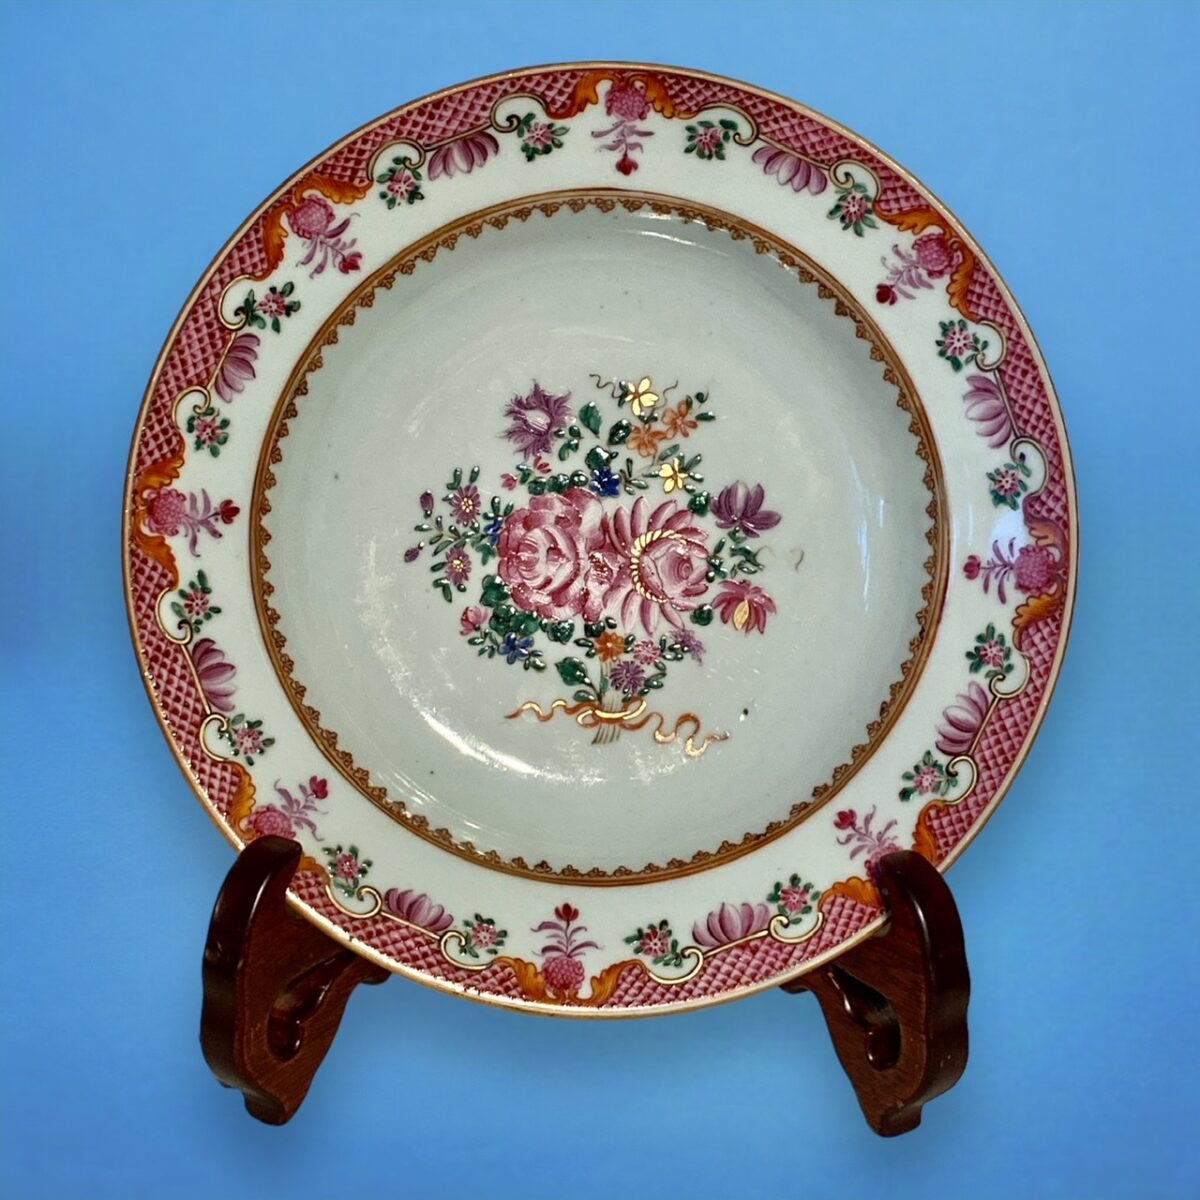 C18th Chinese Export Porcelain Soup Plate.